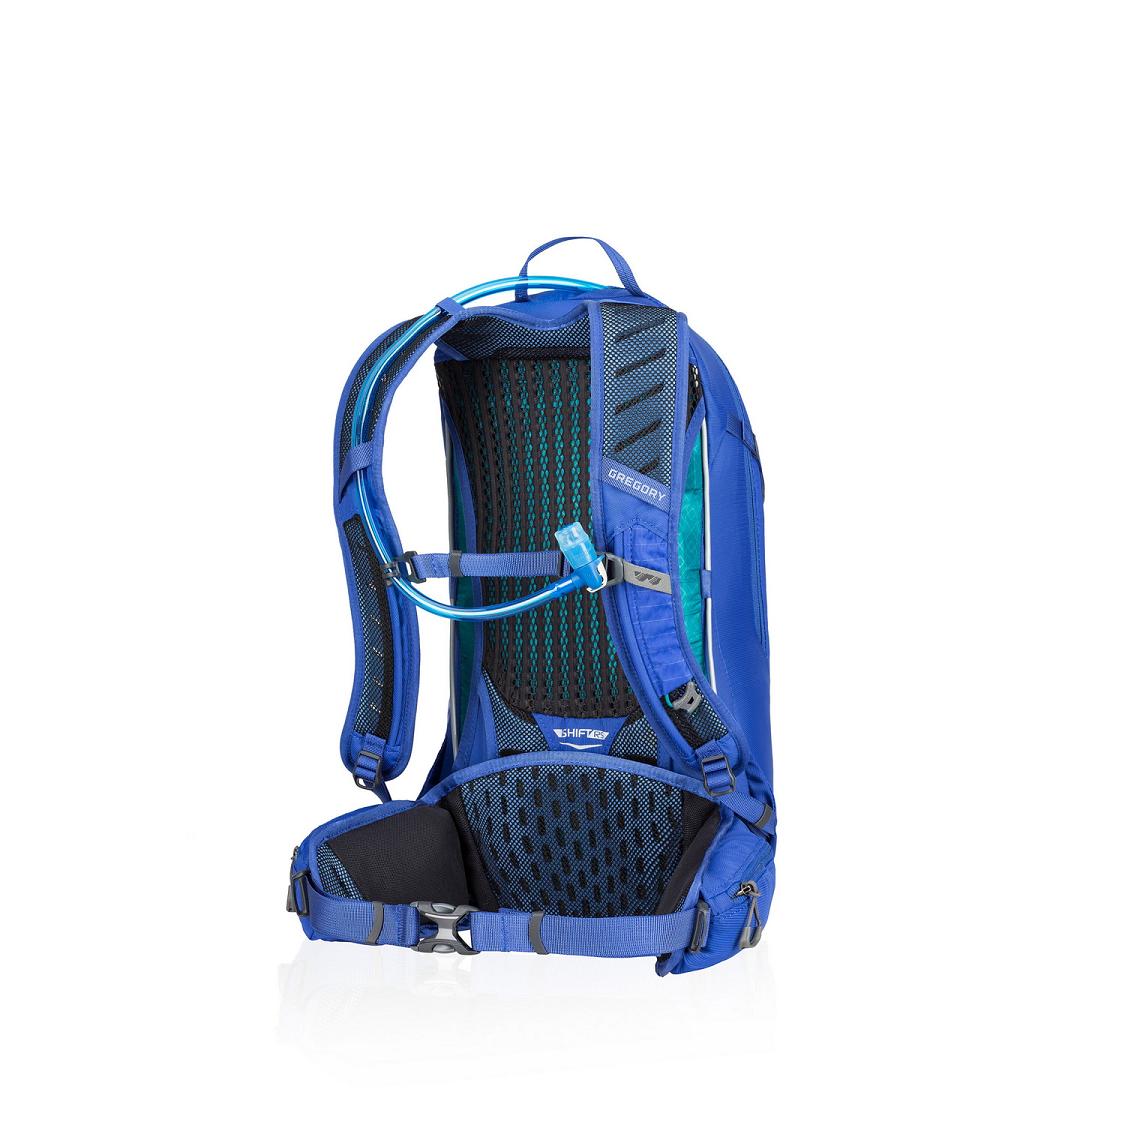 Women Gregory Avos 10 3D-Hydro Hydration Pack Blue Usa JUYI76412